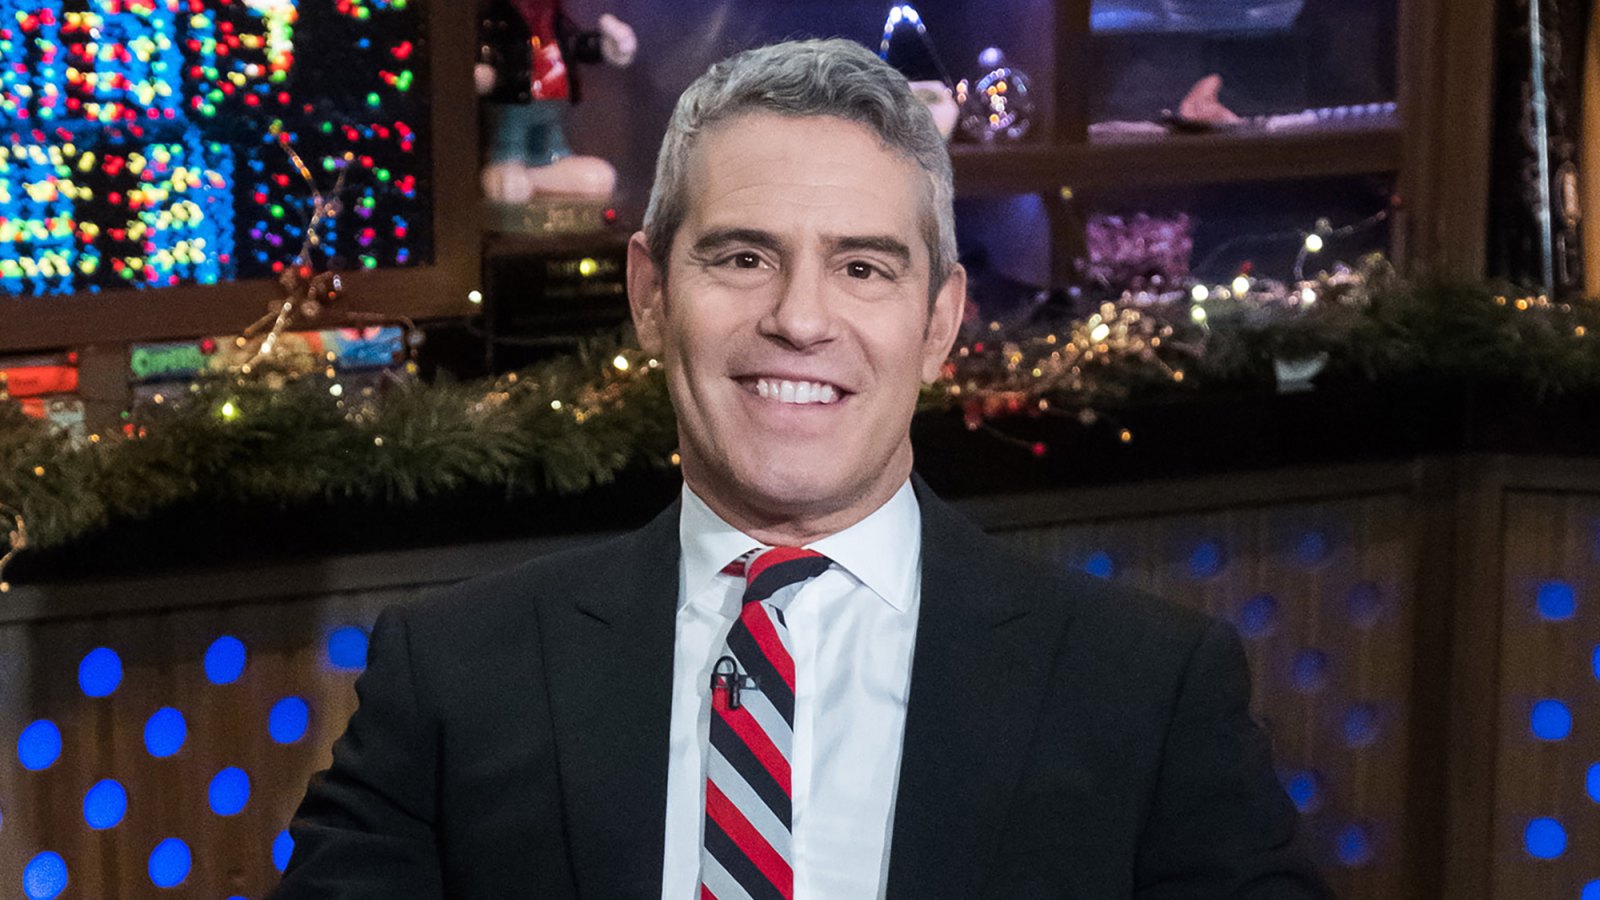 Andy Cohen Says He’s ‘Patiently Waiting’ After Announcing He’s Expecting a Child Via Surrogate